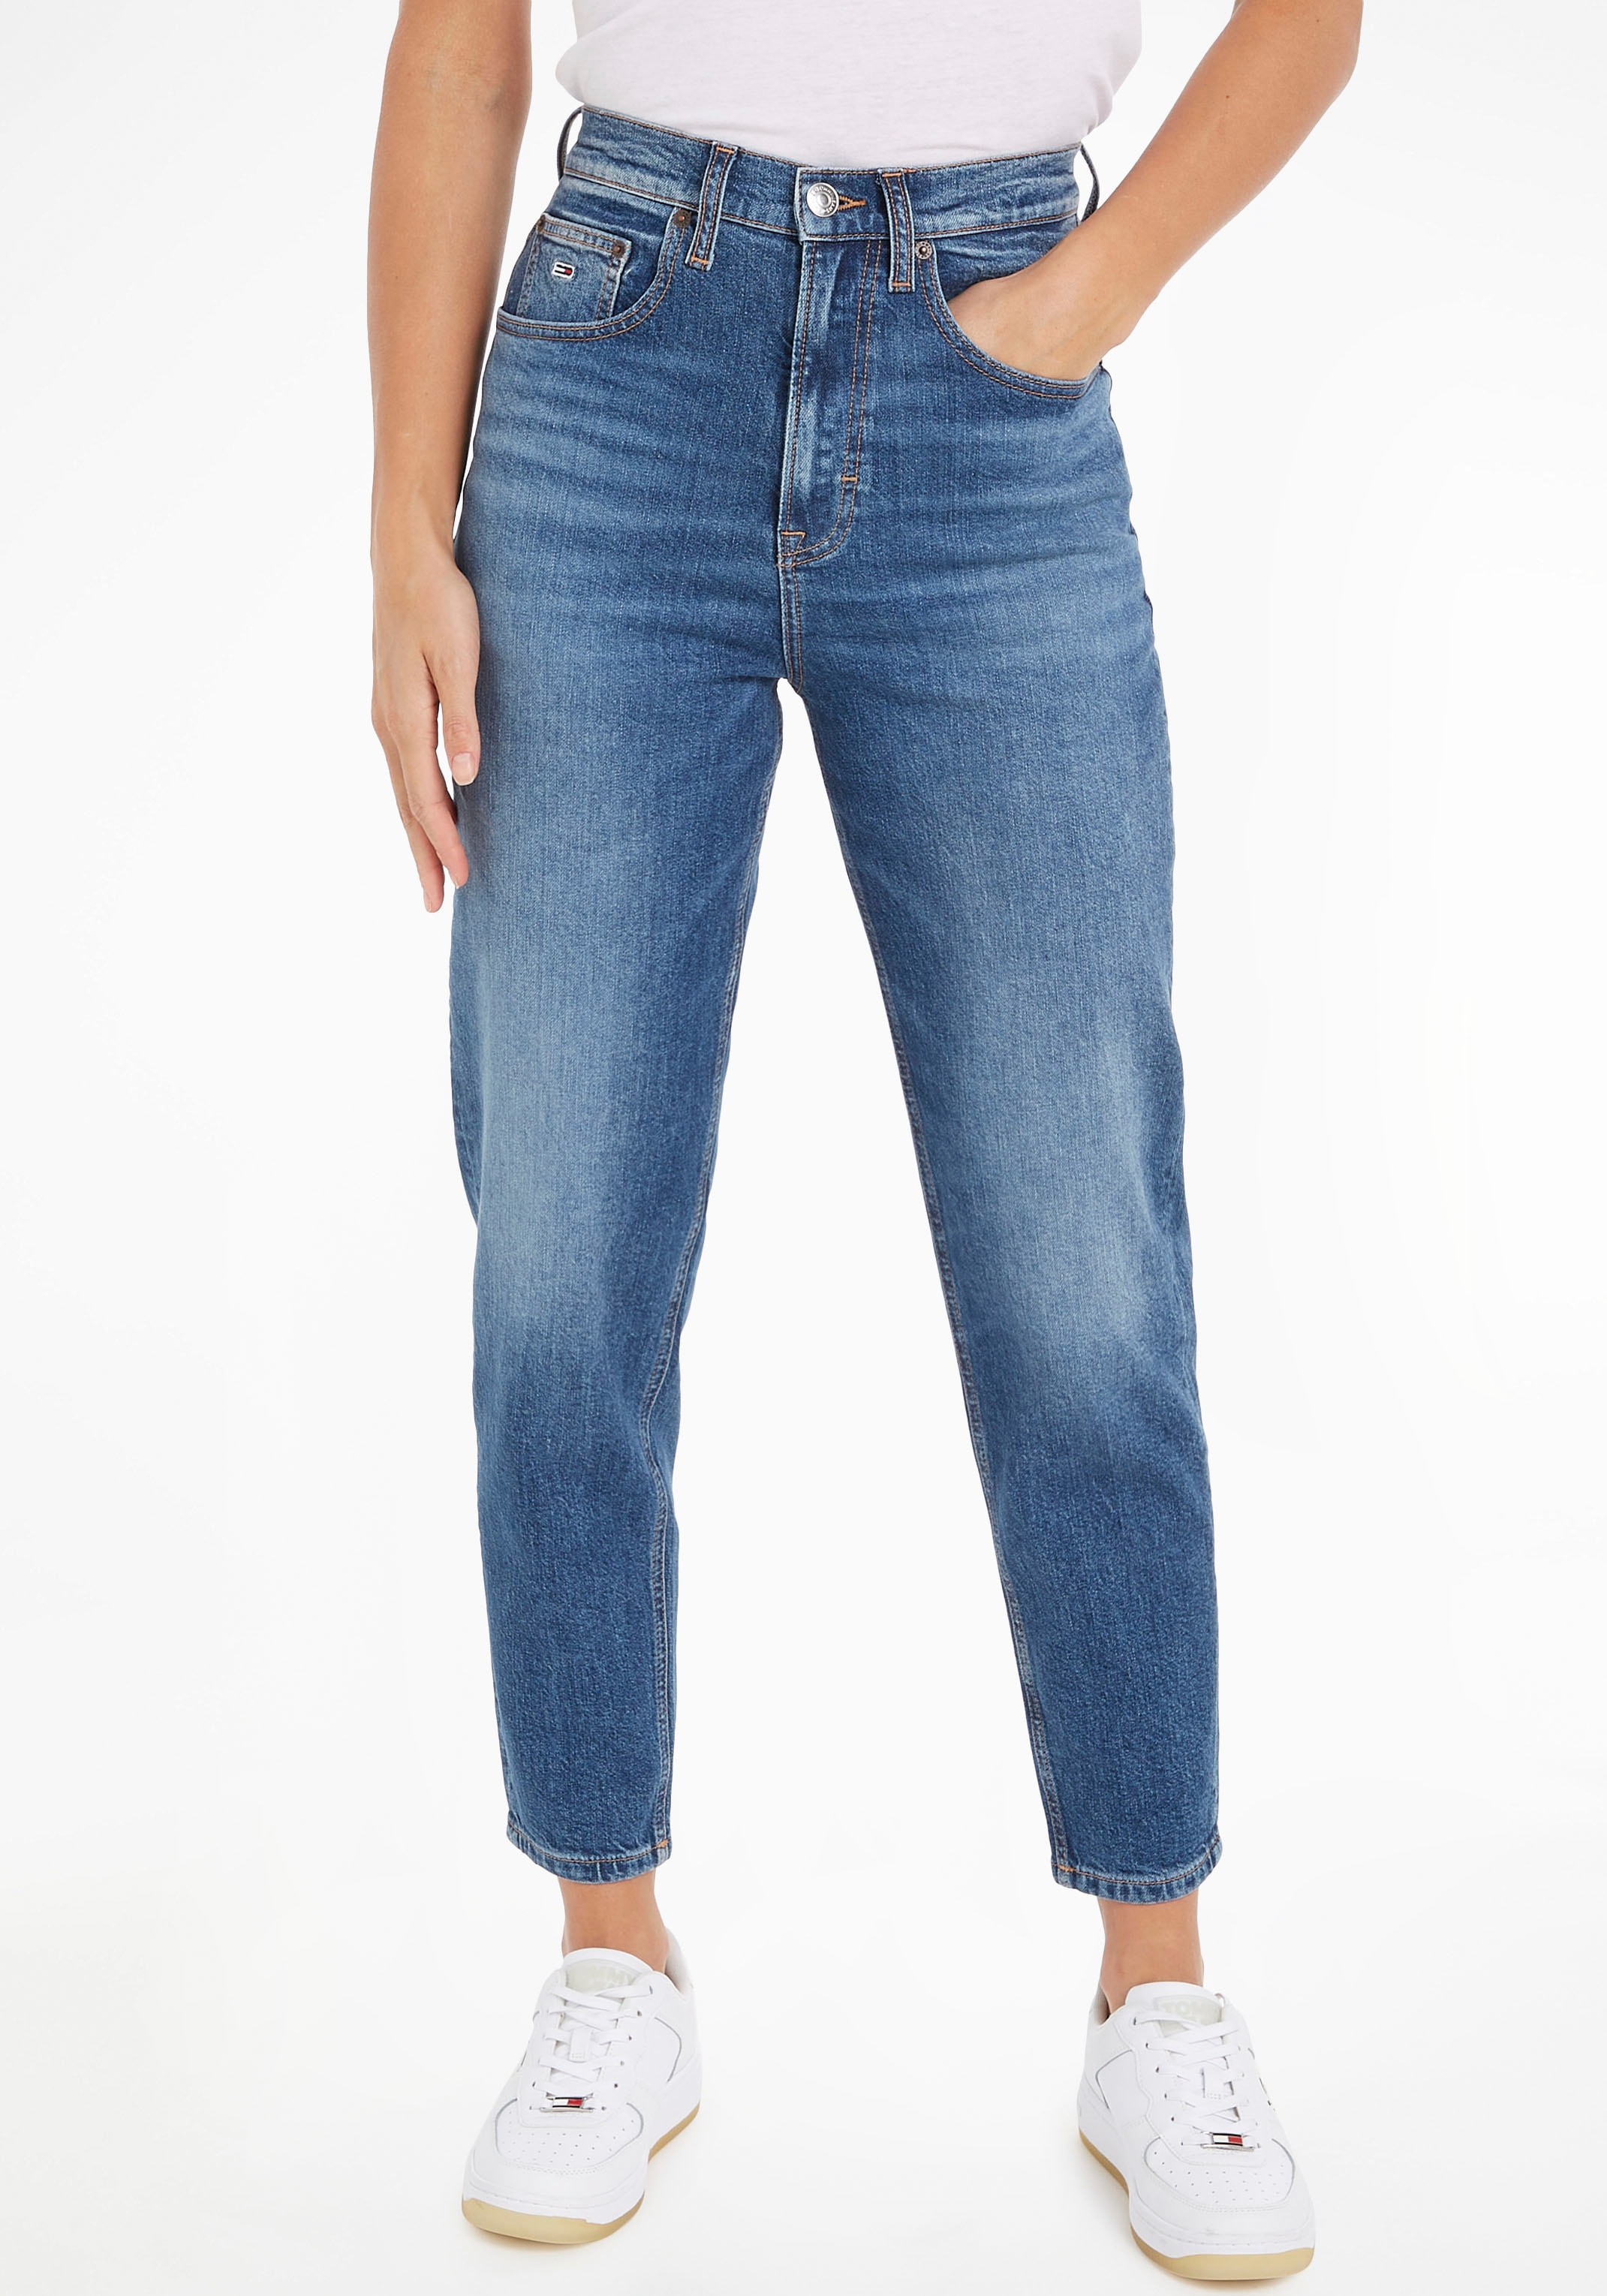 Tommy »MOM JEAN Logobadge und online Mom-Jeans CG5136«, Jeans Labelflags UHR bei TPR mit